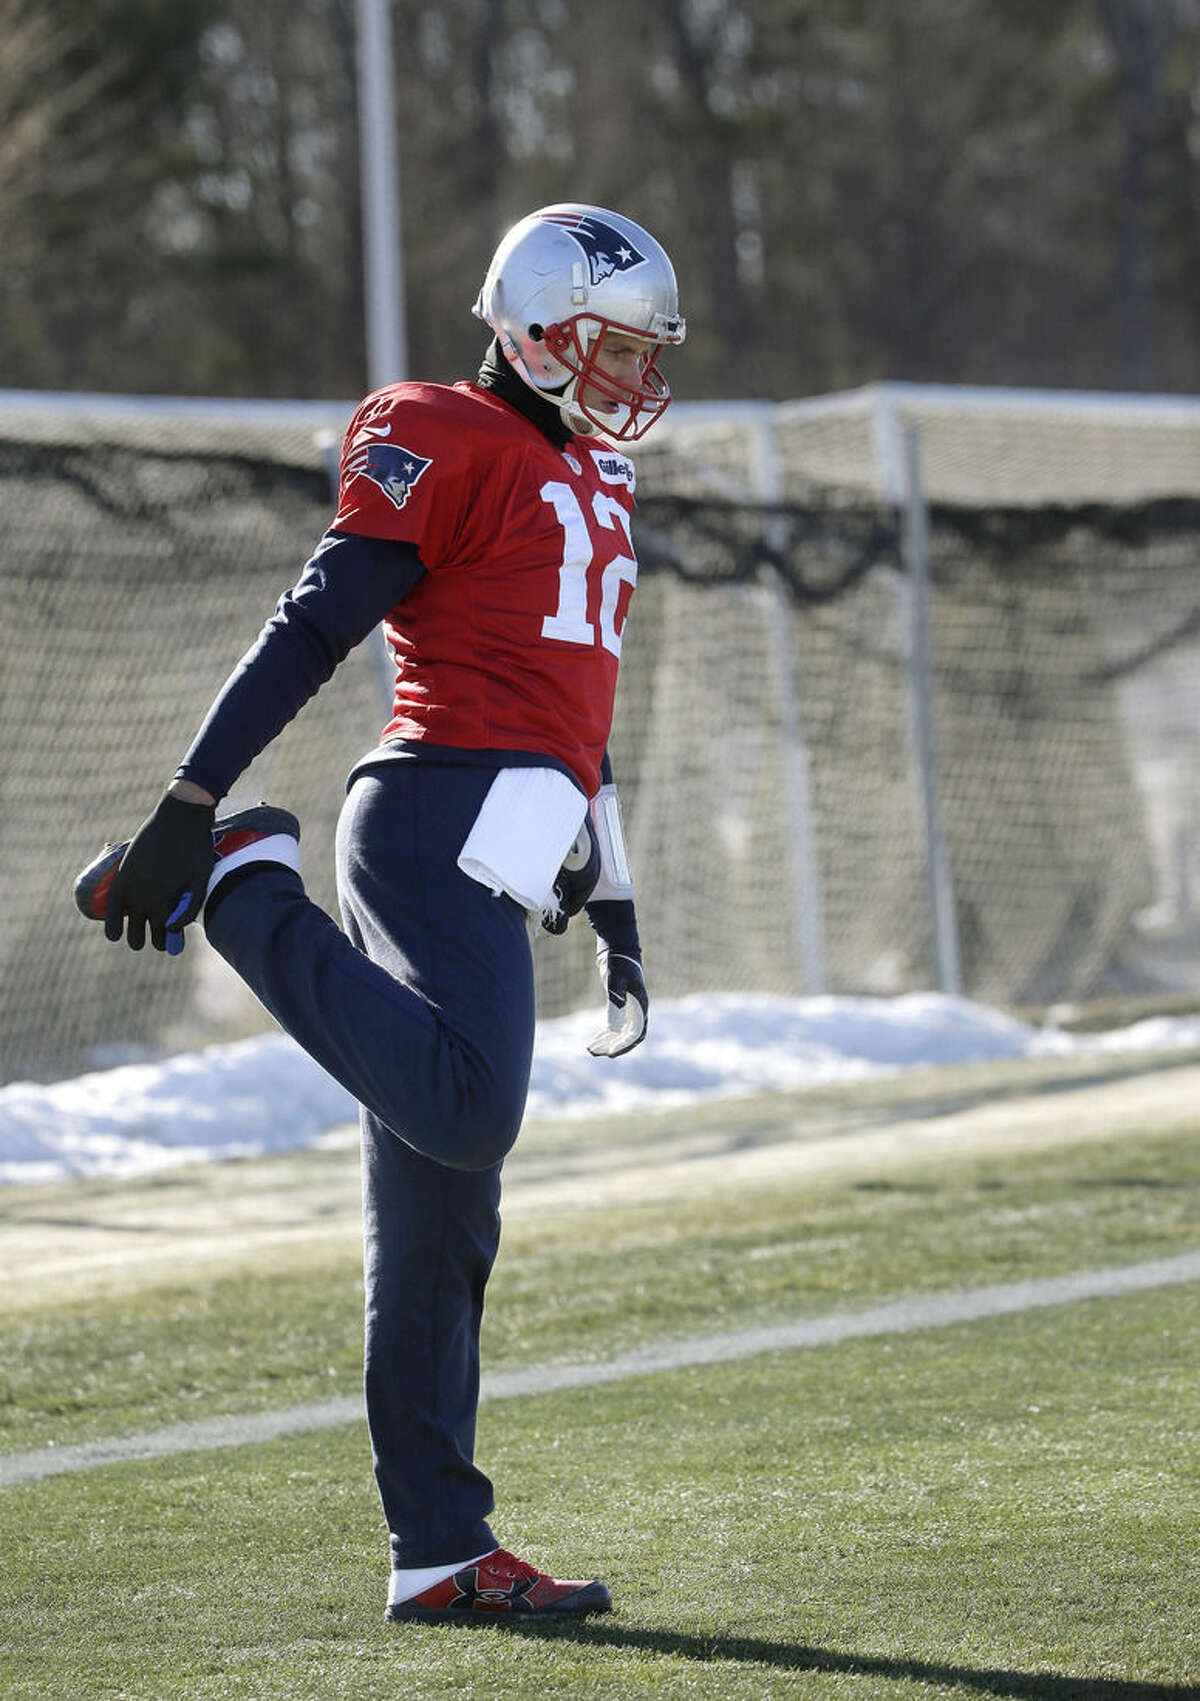 New England Patriots quarterback Tom Brady stretches while warming up during an NFL football practice, Thursday, Jan. 21, 2016, in Foxborough, Mass. The Patriots are to play the Denver Broncos in the AFC Championship on Sunday in Denver. (AP Photo/Steven Senne)